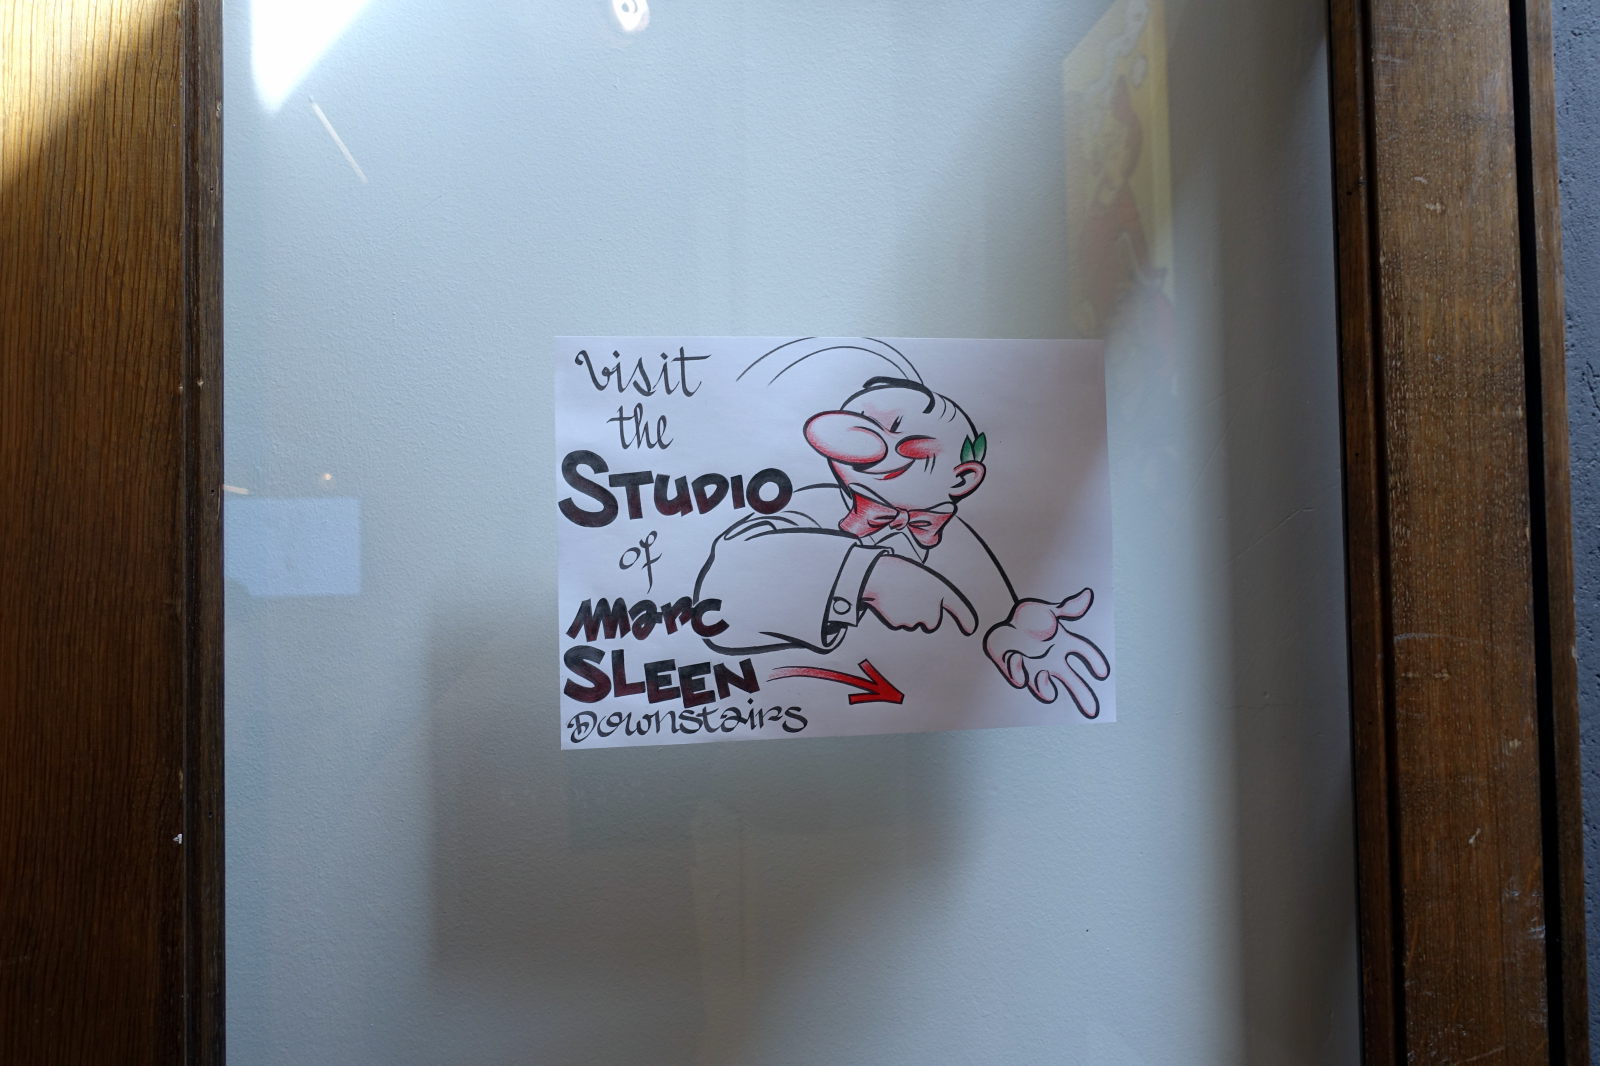 Come to see Marc Sleen's studio